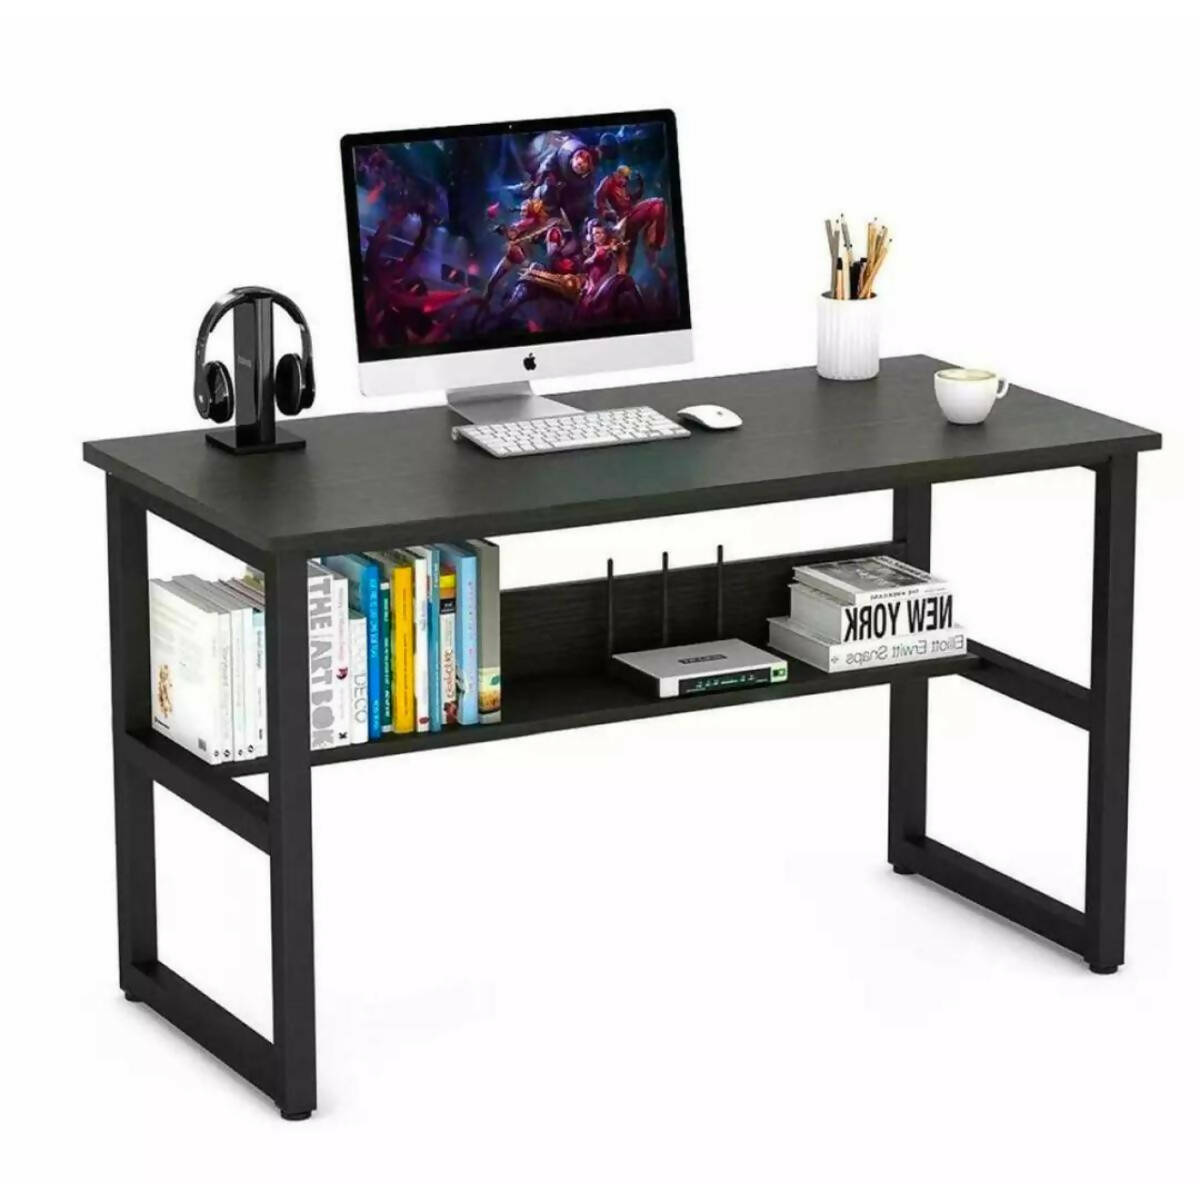 Office Tables | Office Desks | Executive Tables | Torch Office | Computer desk for home